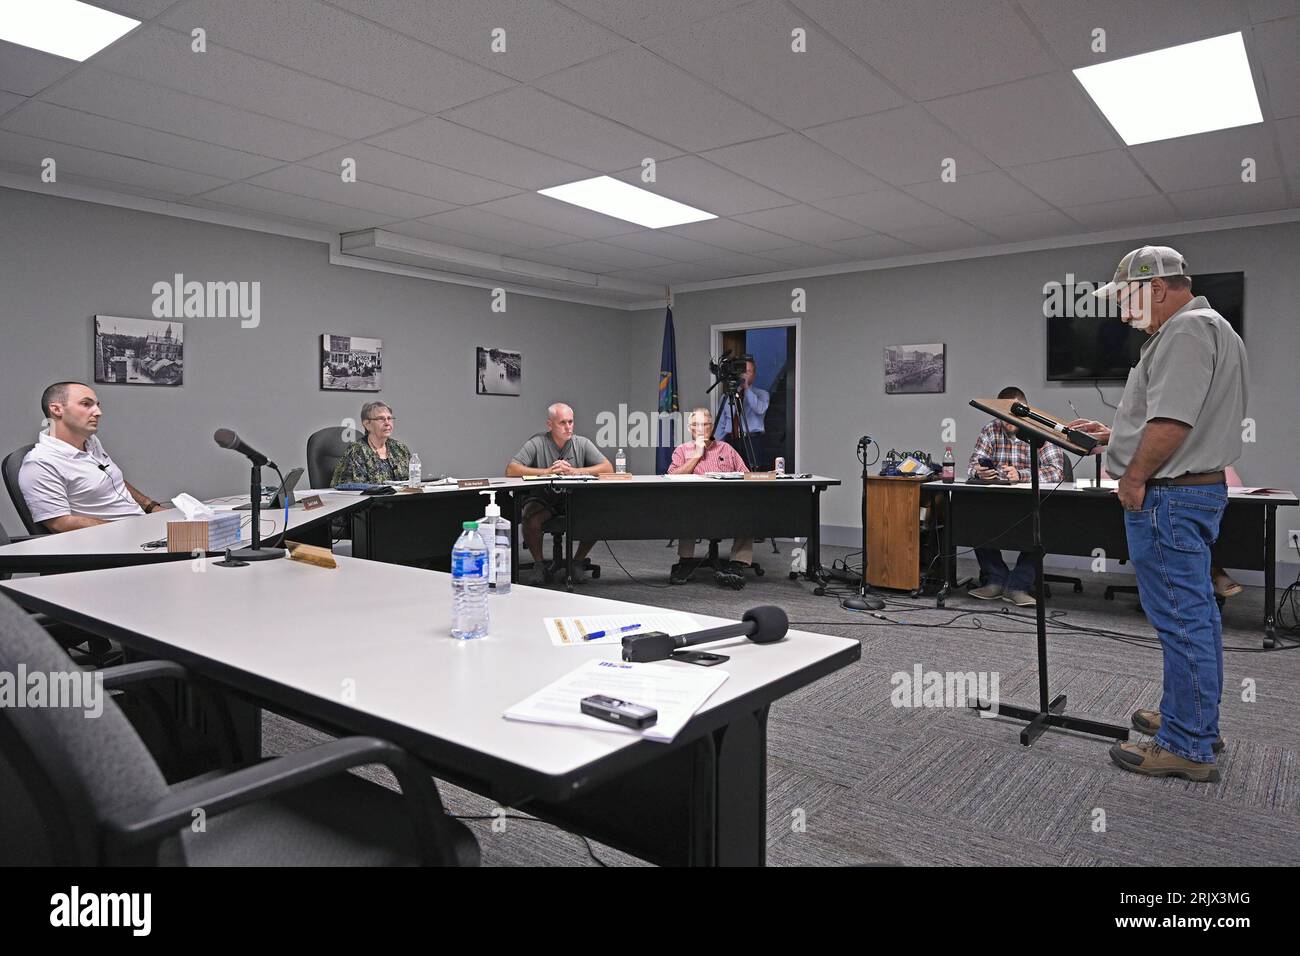 MARION, KANSAS - AUGUST 21, 2023 Darwin Markley a member of the Marion planning and zoning board tells the city council  that they should fire Marion Police Chief Gideon Cody “As far as Chief Cody goes, he can take his high horse he brought into this community and giddy up on out of town” Stock Photo